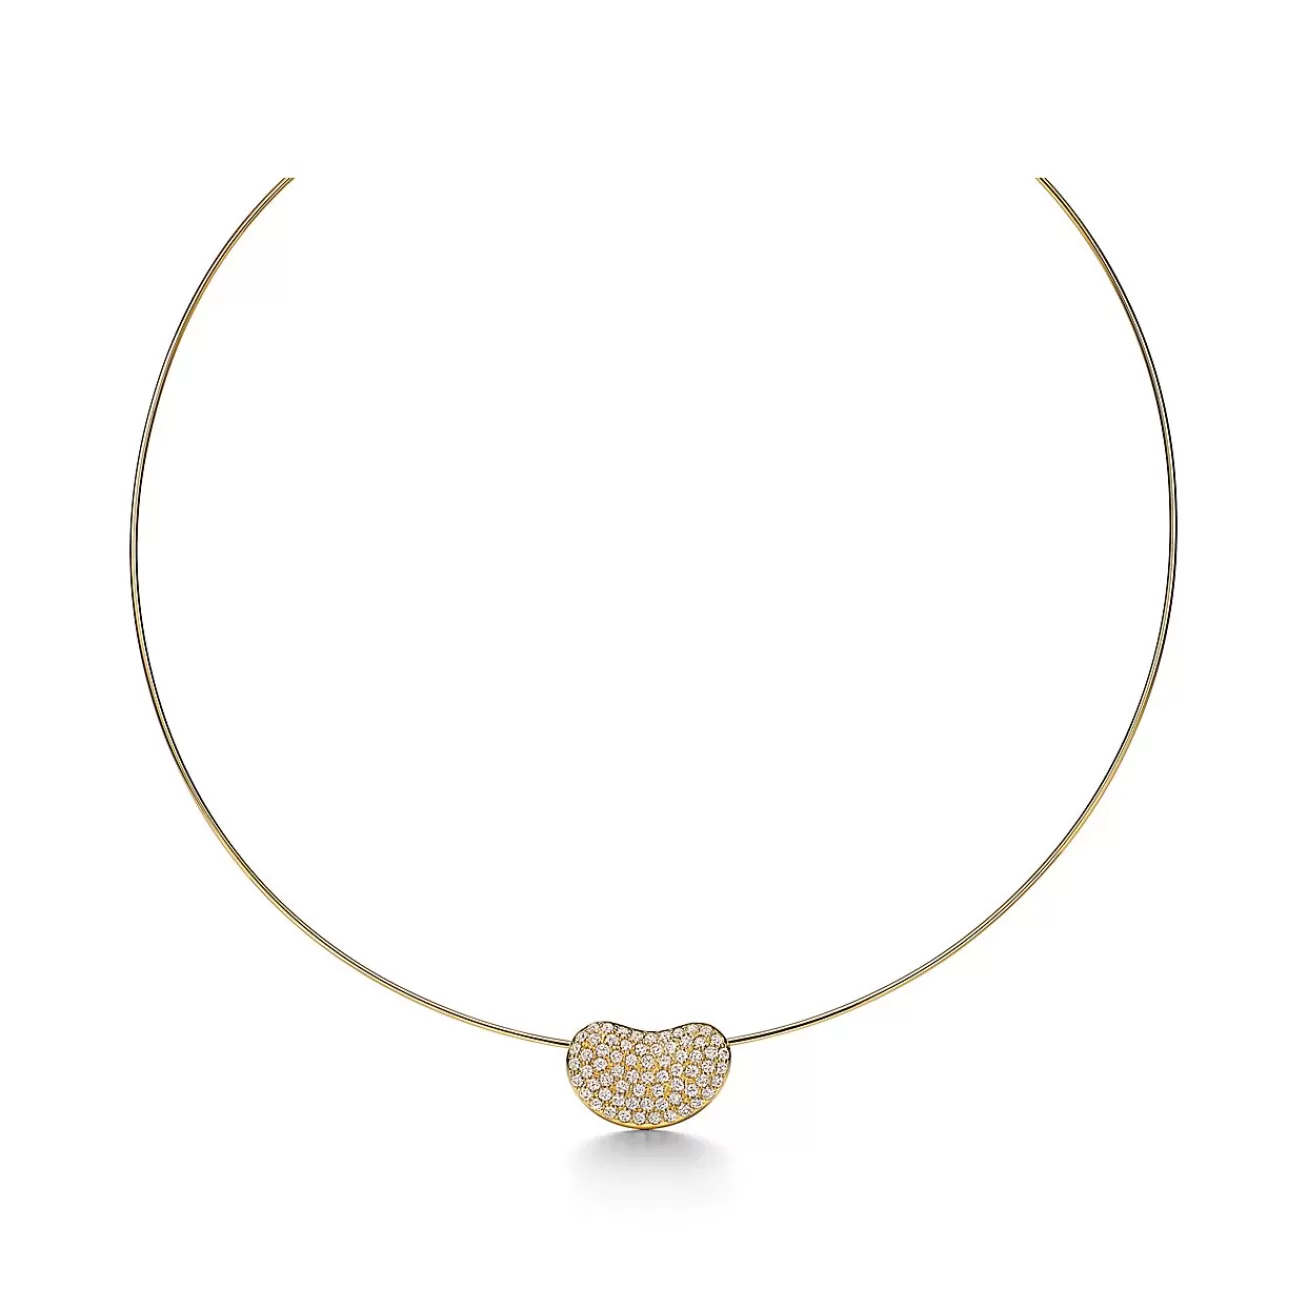 Tiffany & Co. Elsa Peretti® Bean® design Wire Necklace in Gold with Pavé Diamonds, 20 mm | ^ Necklaces & Pendants | Gold Jewelry